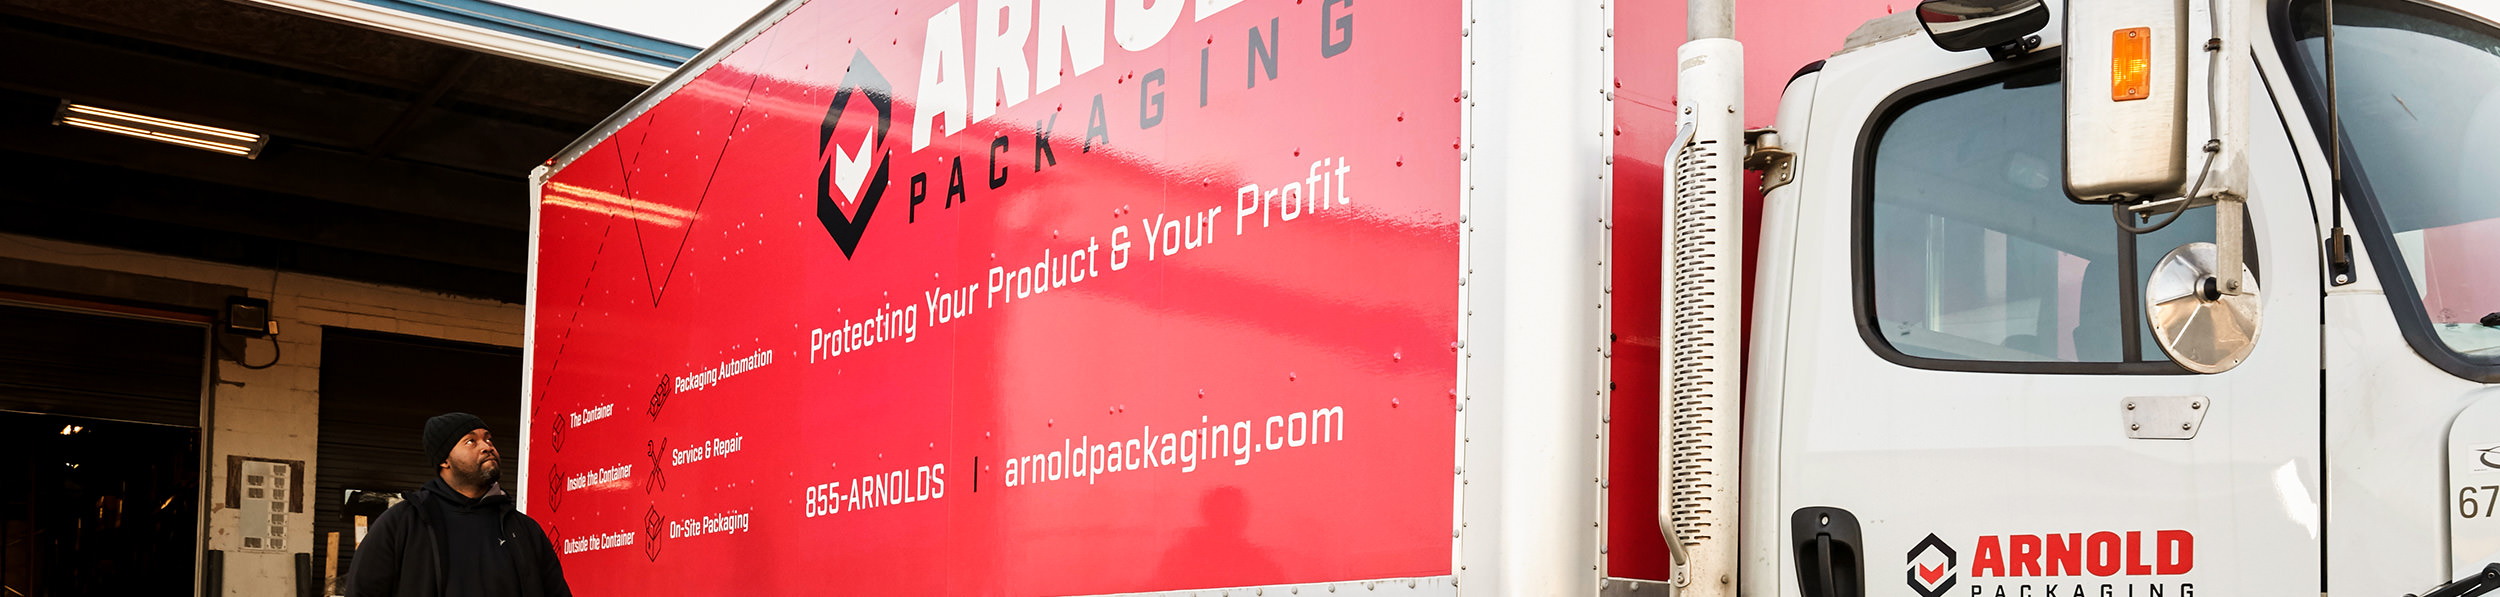 Arnold Packaging - Reduced Freight Cost